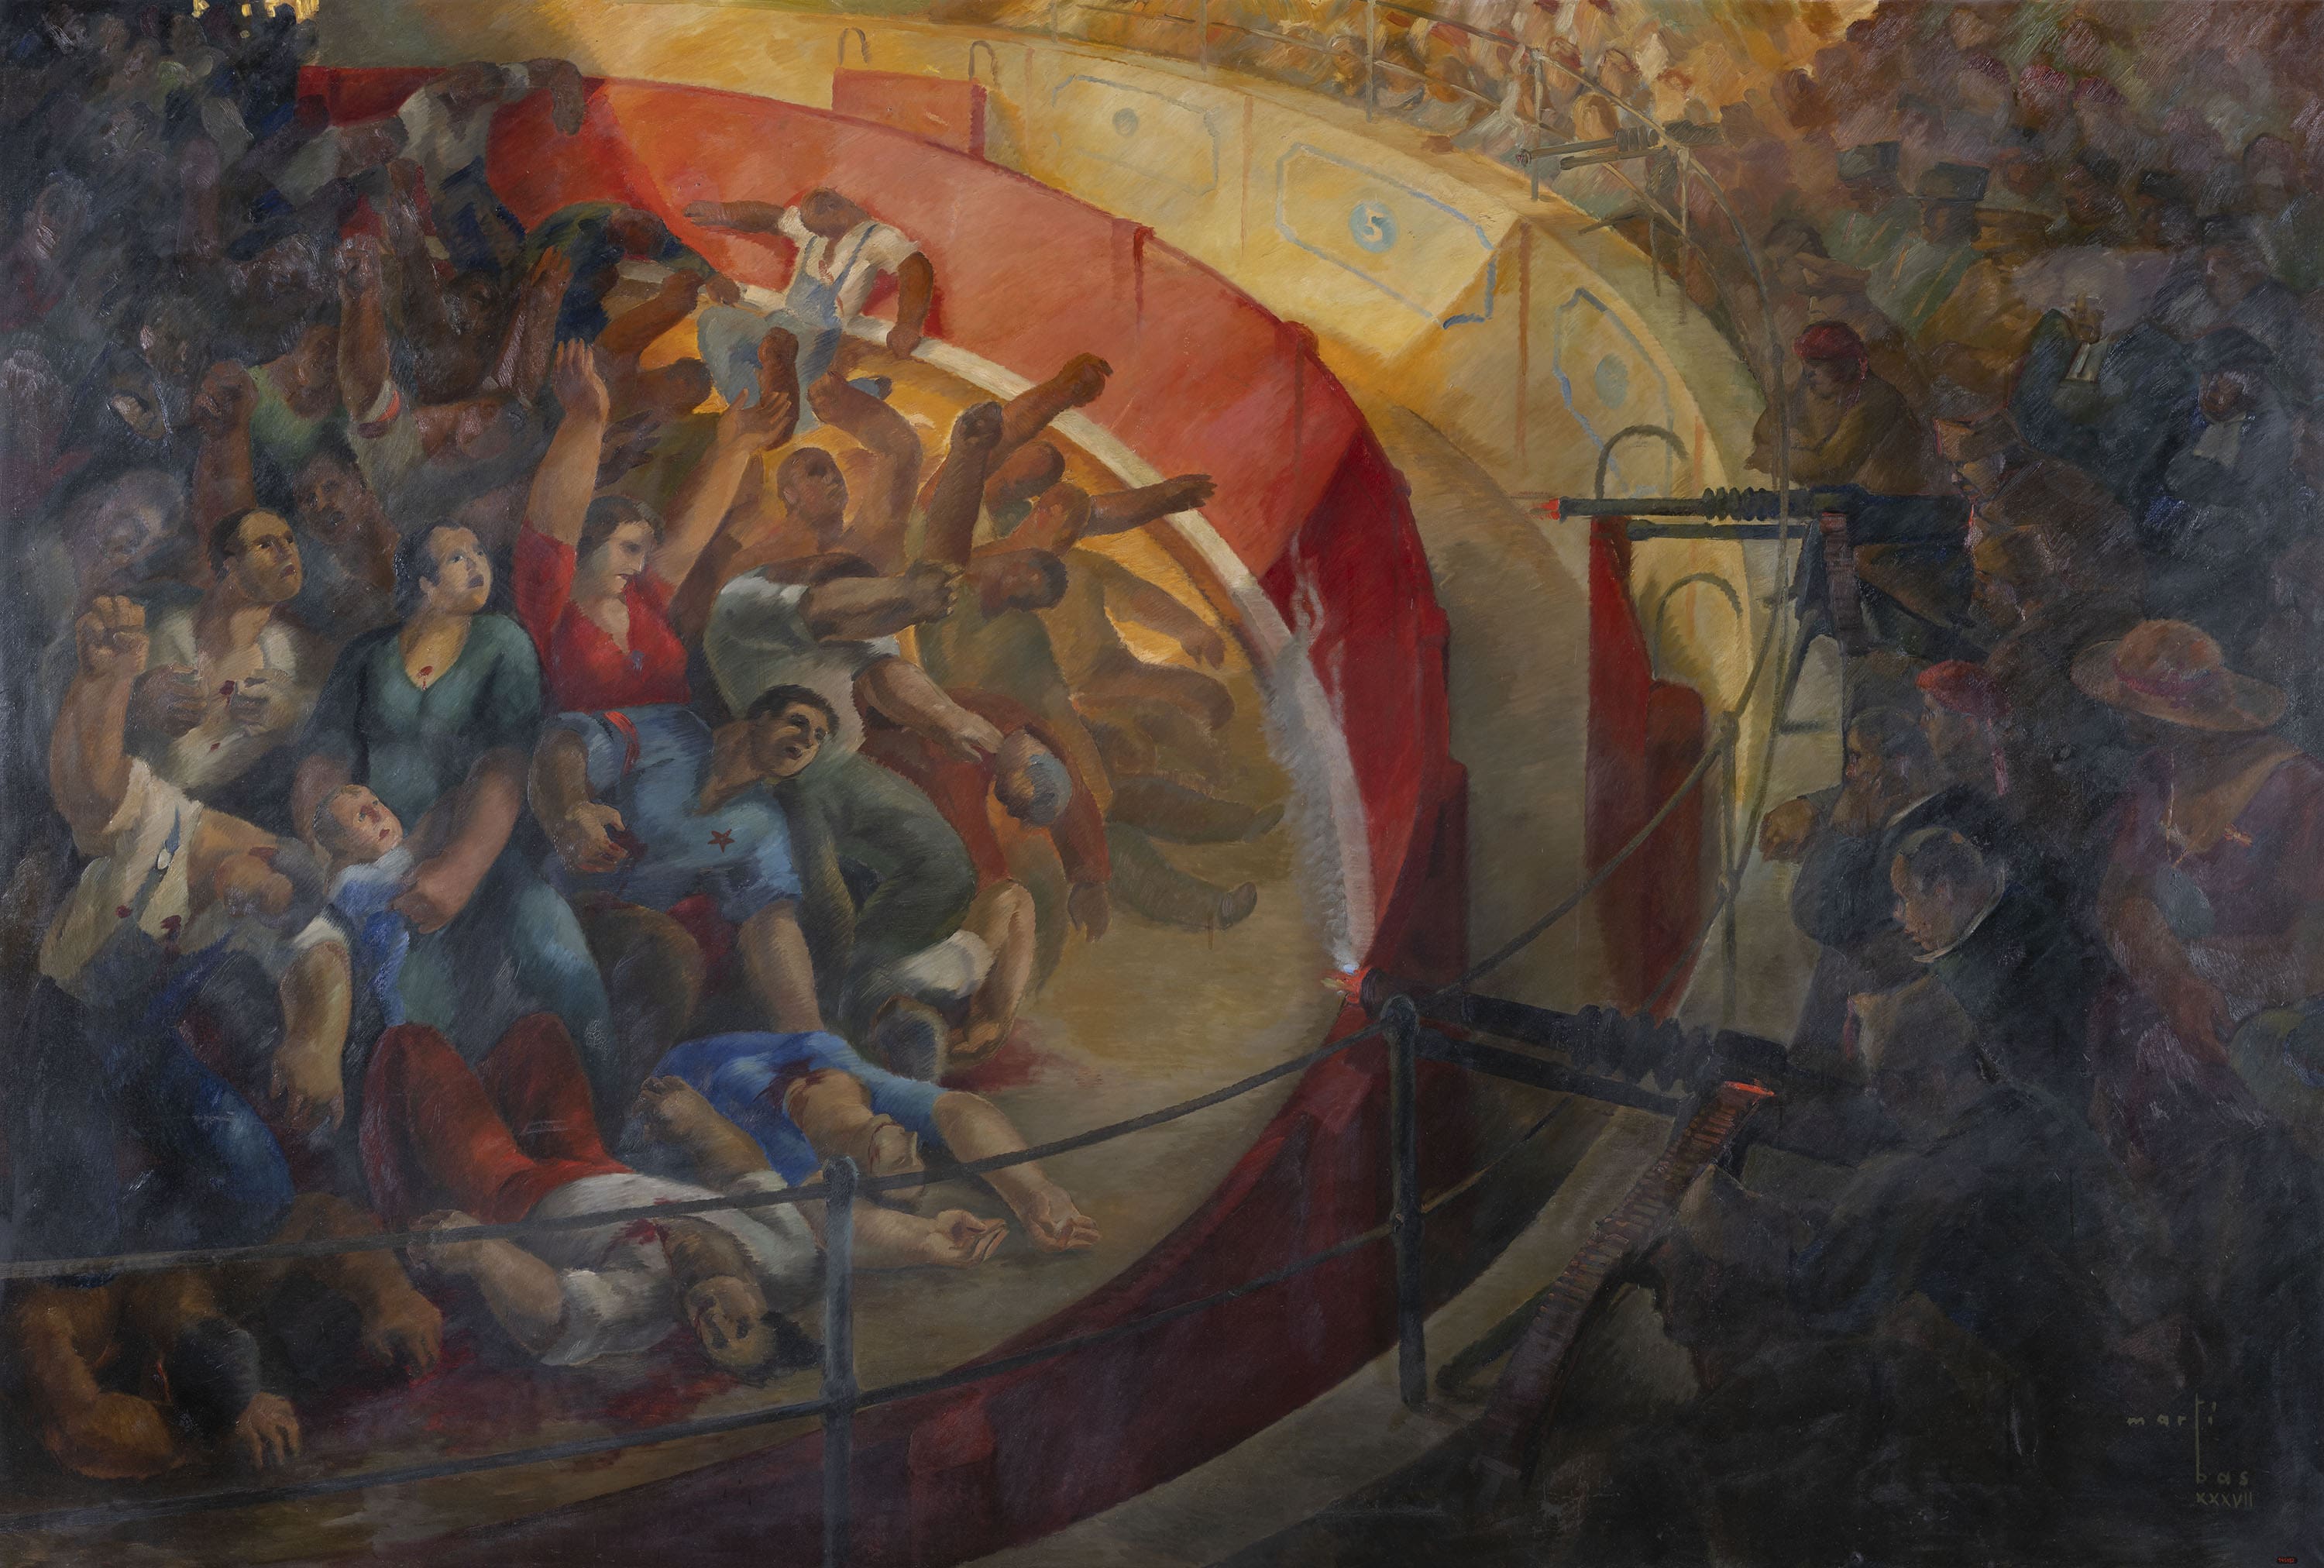 One of the pieces on display at the MNAC: 'Executions at the bullring of Badajoz' by Martí Bas (image courtesy of MNAC)